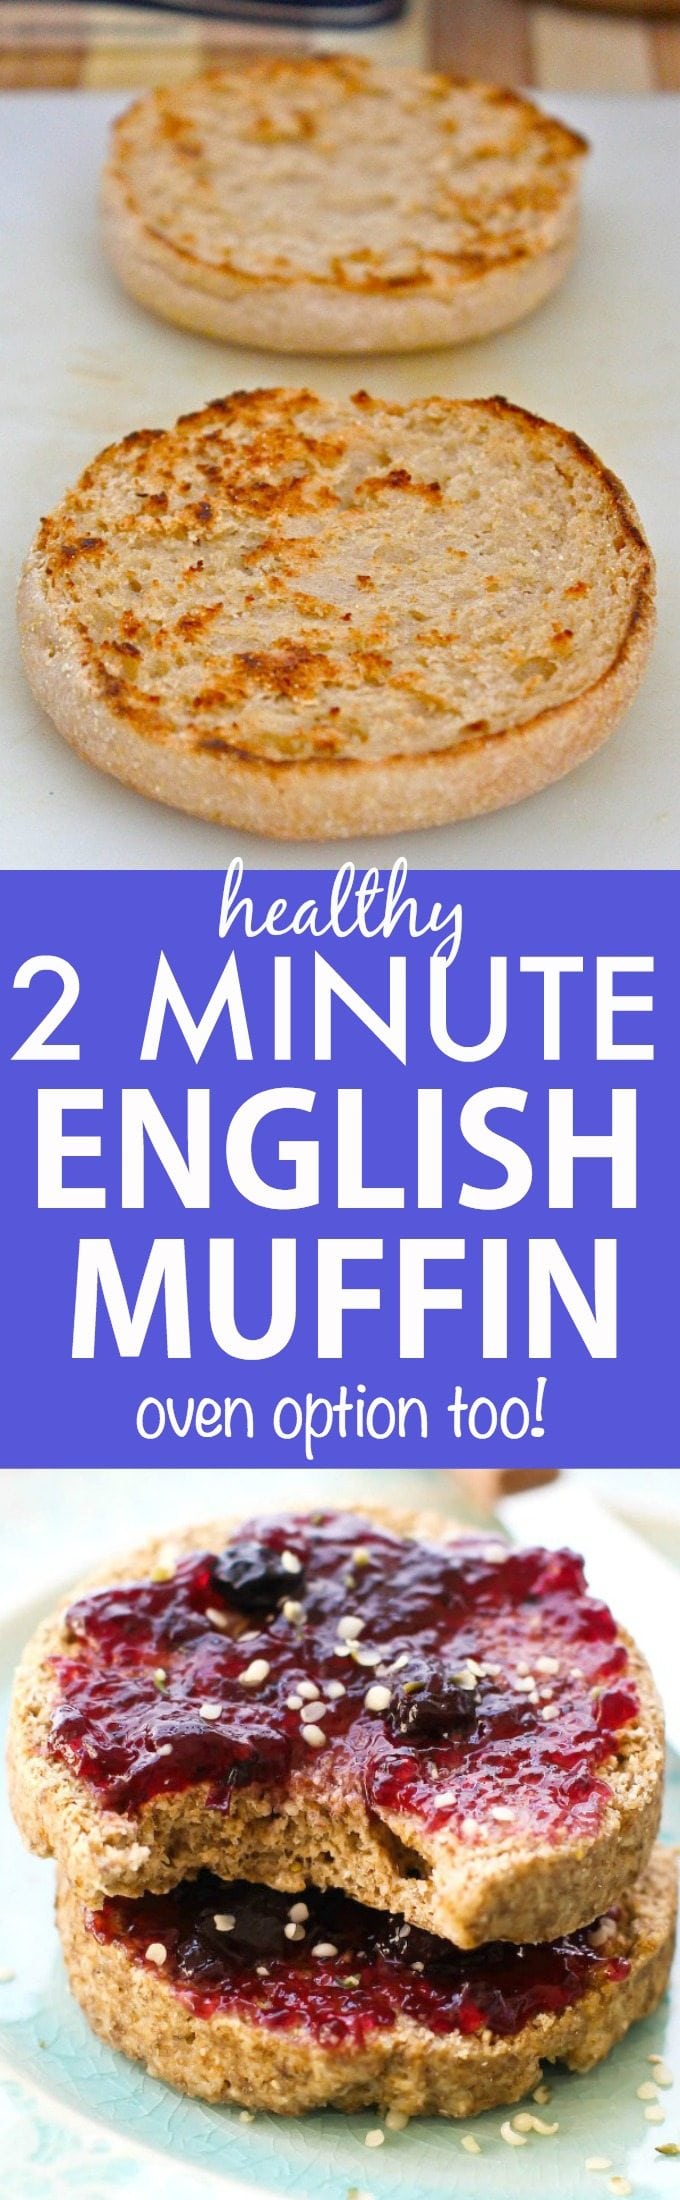 TWO Minute Flourless English Muffin- Perfect toasted and a bread alternative, these crispy, chewy and tender English muffins are completely yeast free and made in a microwave or an oven- There is a grain free option too! {Vegan, gluten free, paleo recipe}- thebigmansworld.com